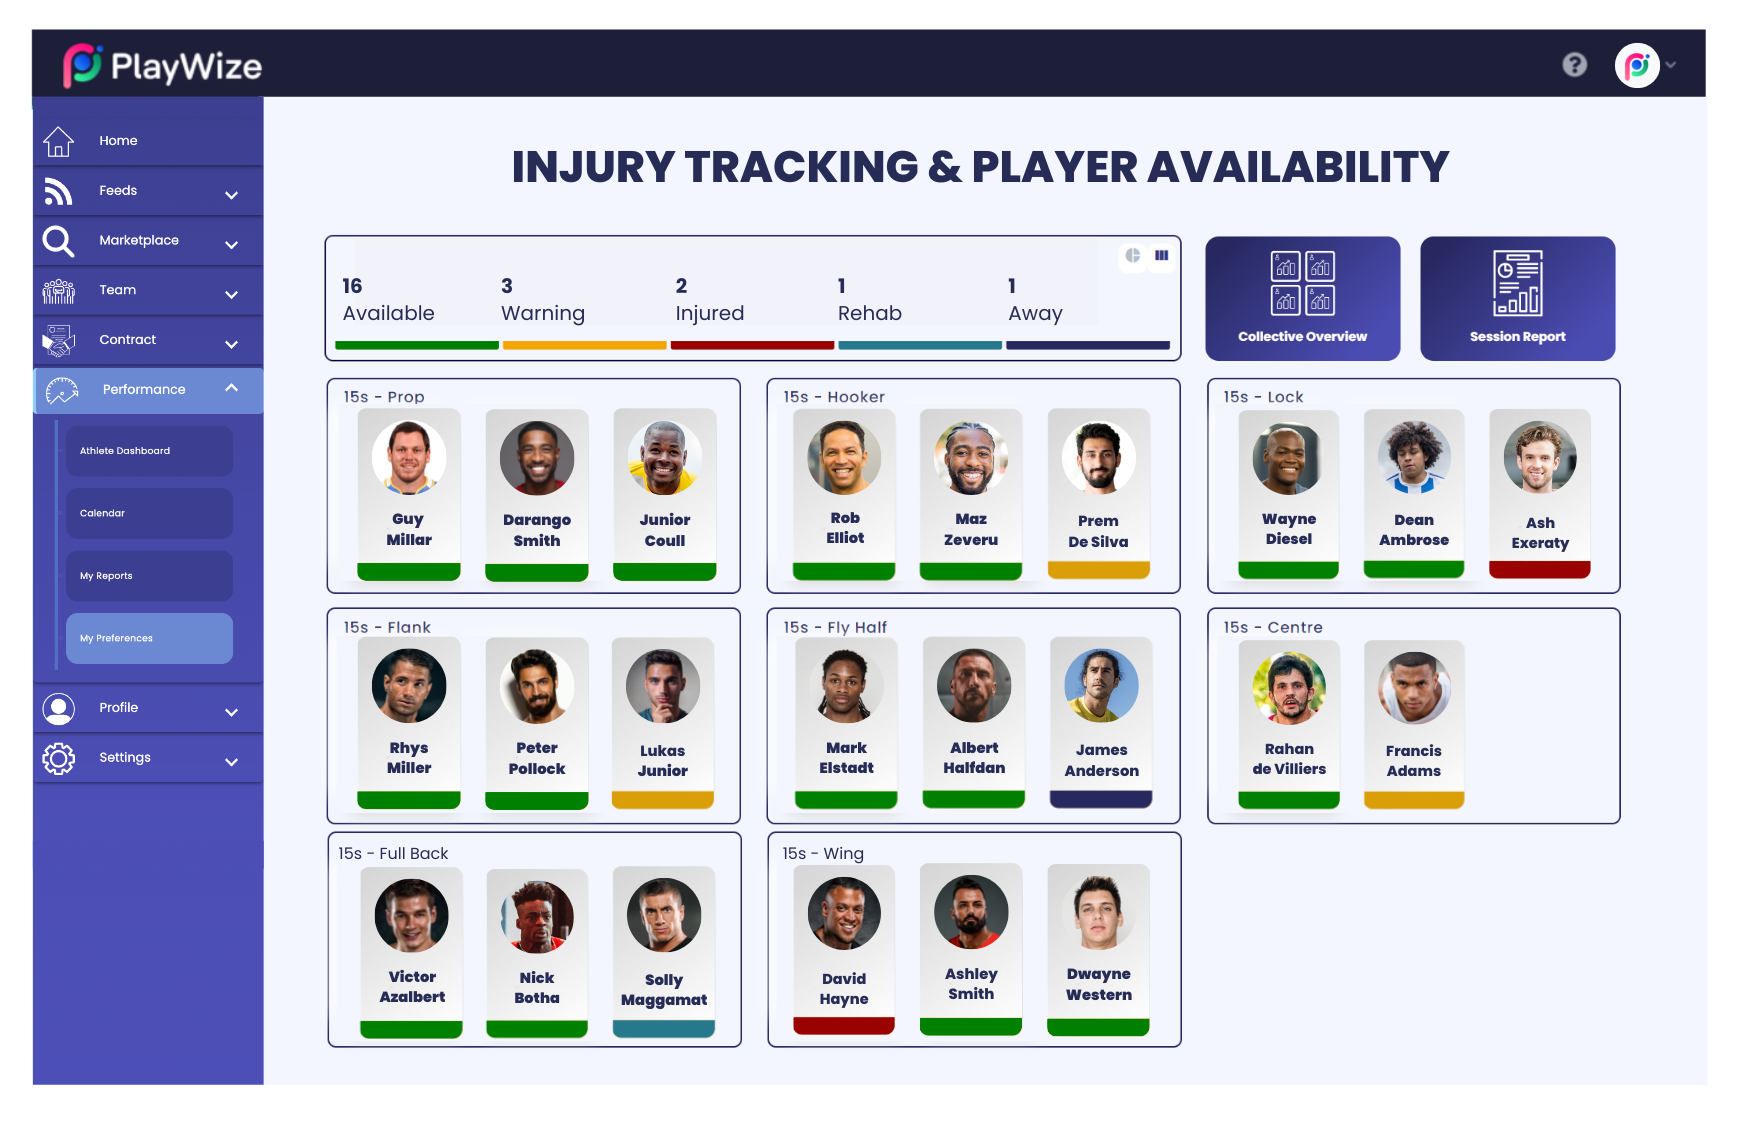 Injury Tracking & Player Availability